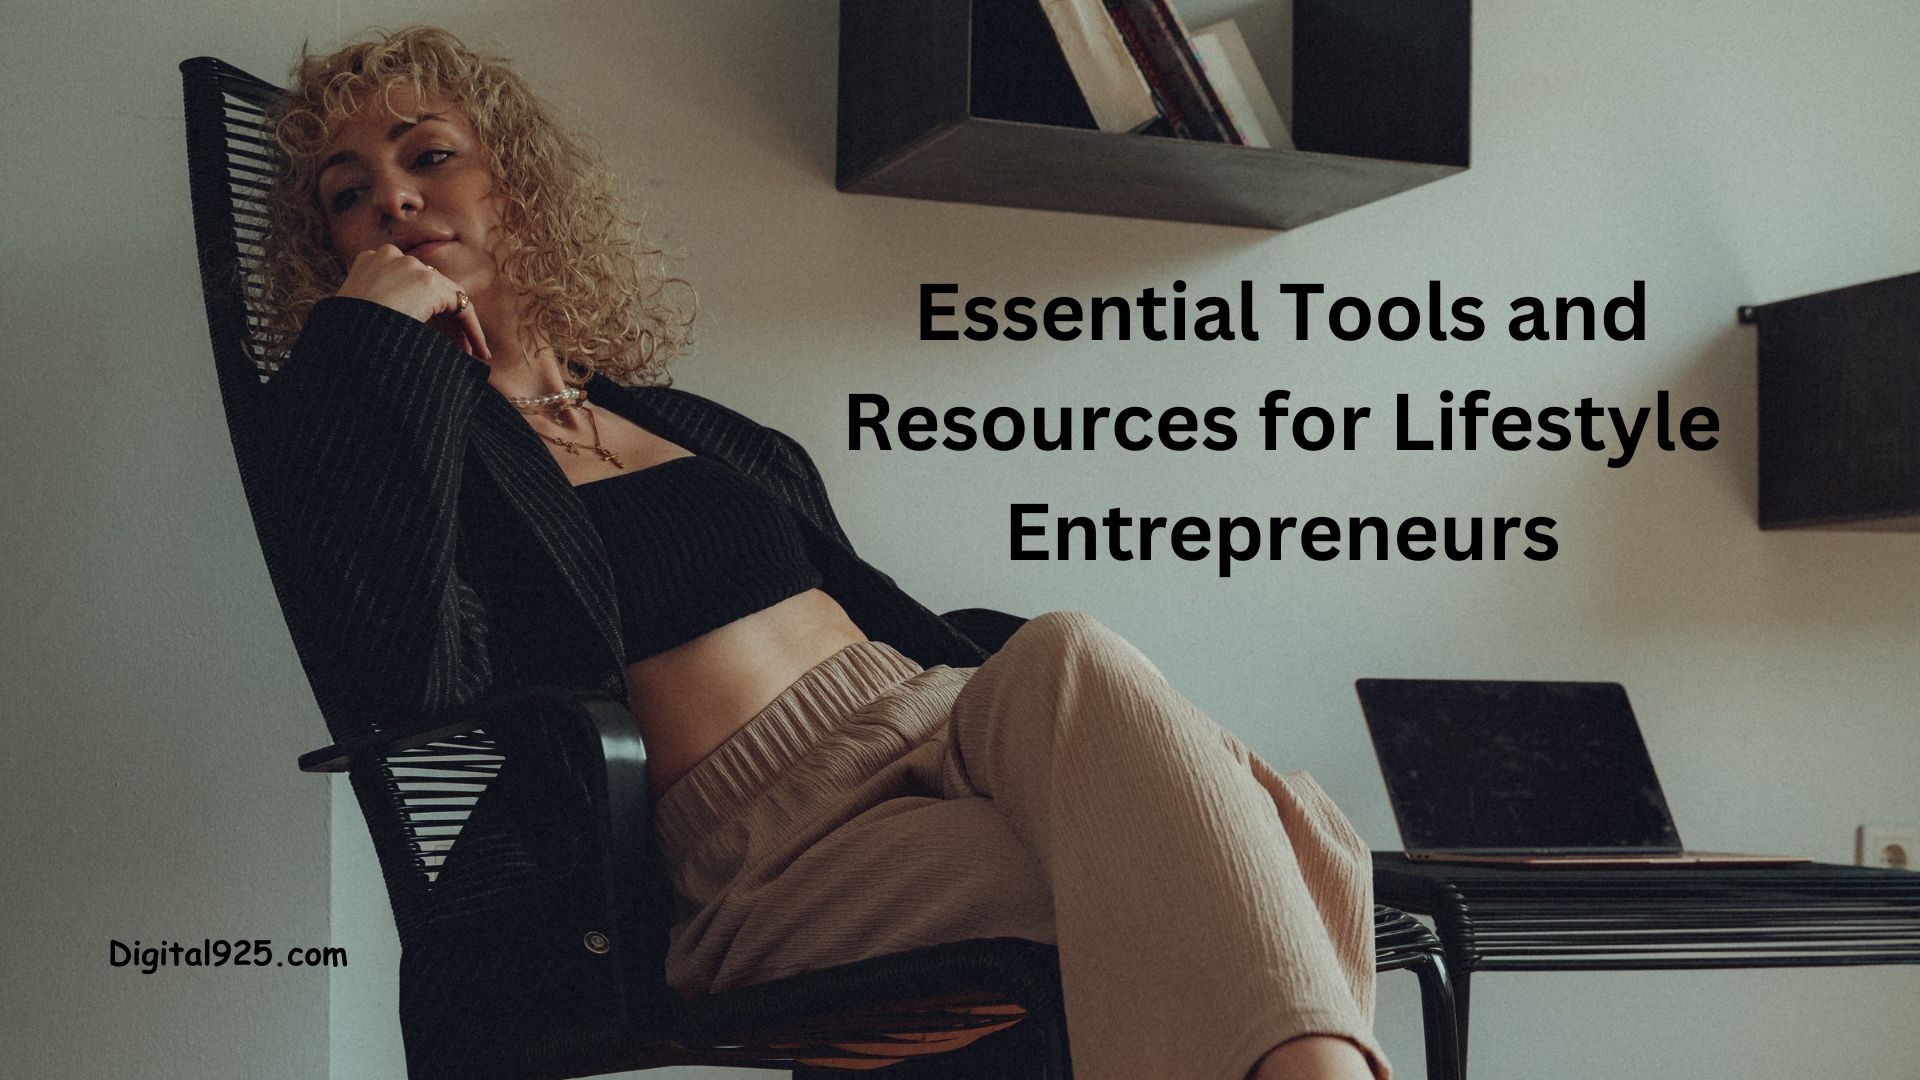 Essential Tools and Resources for Lifestyle Entrepreneurs